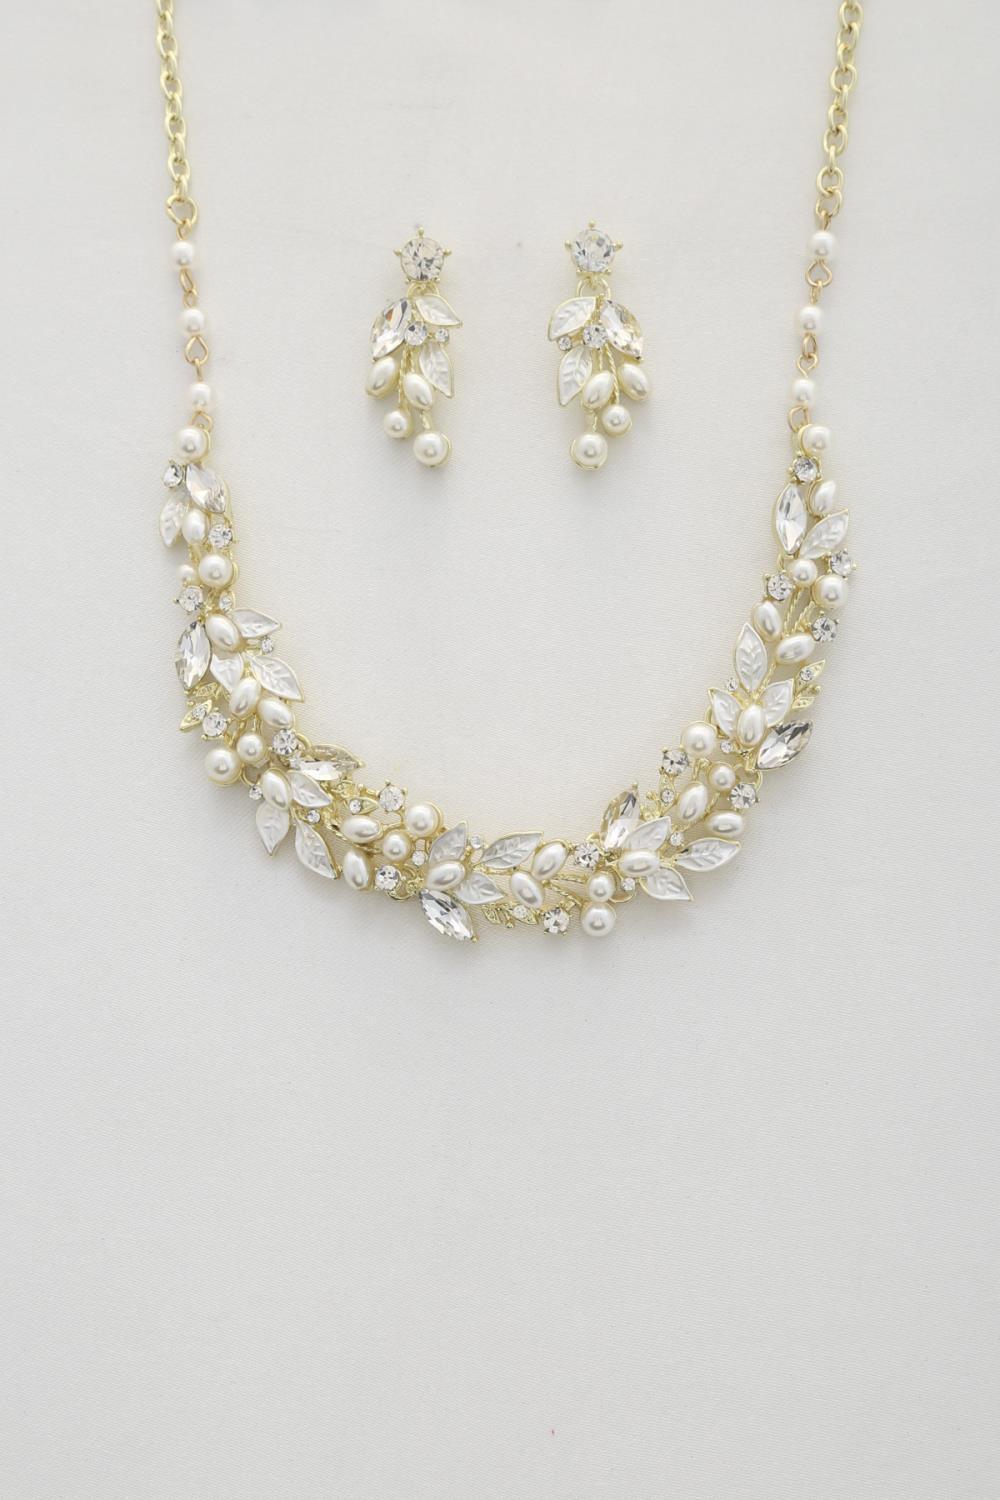 Leaf Pattern Pearl Crystal Necklace Naughty Smile Fashion